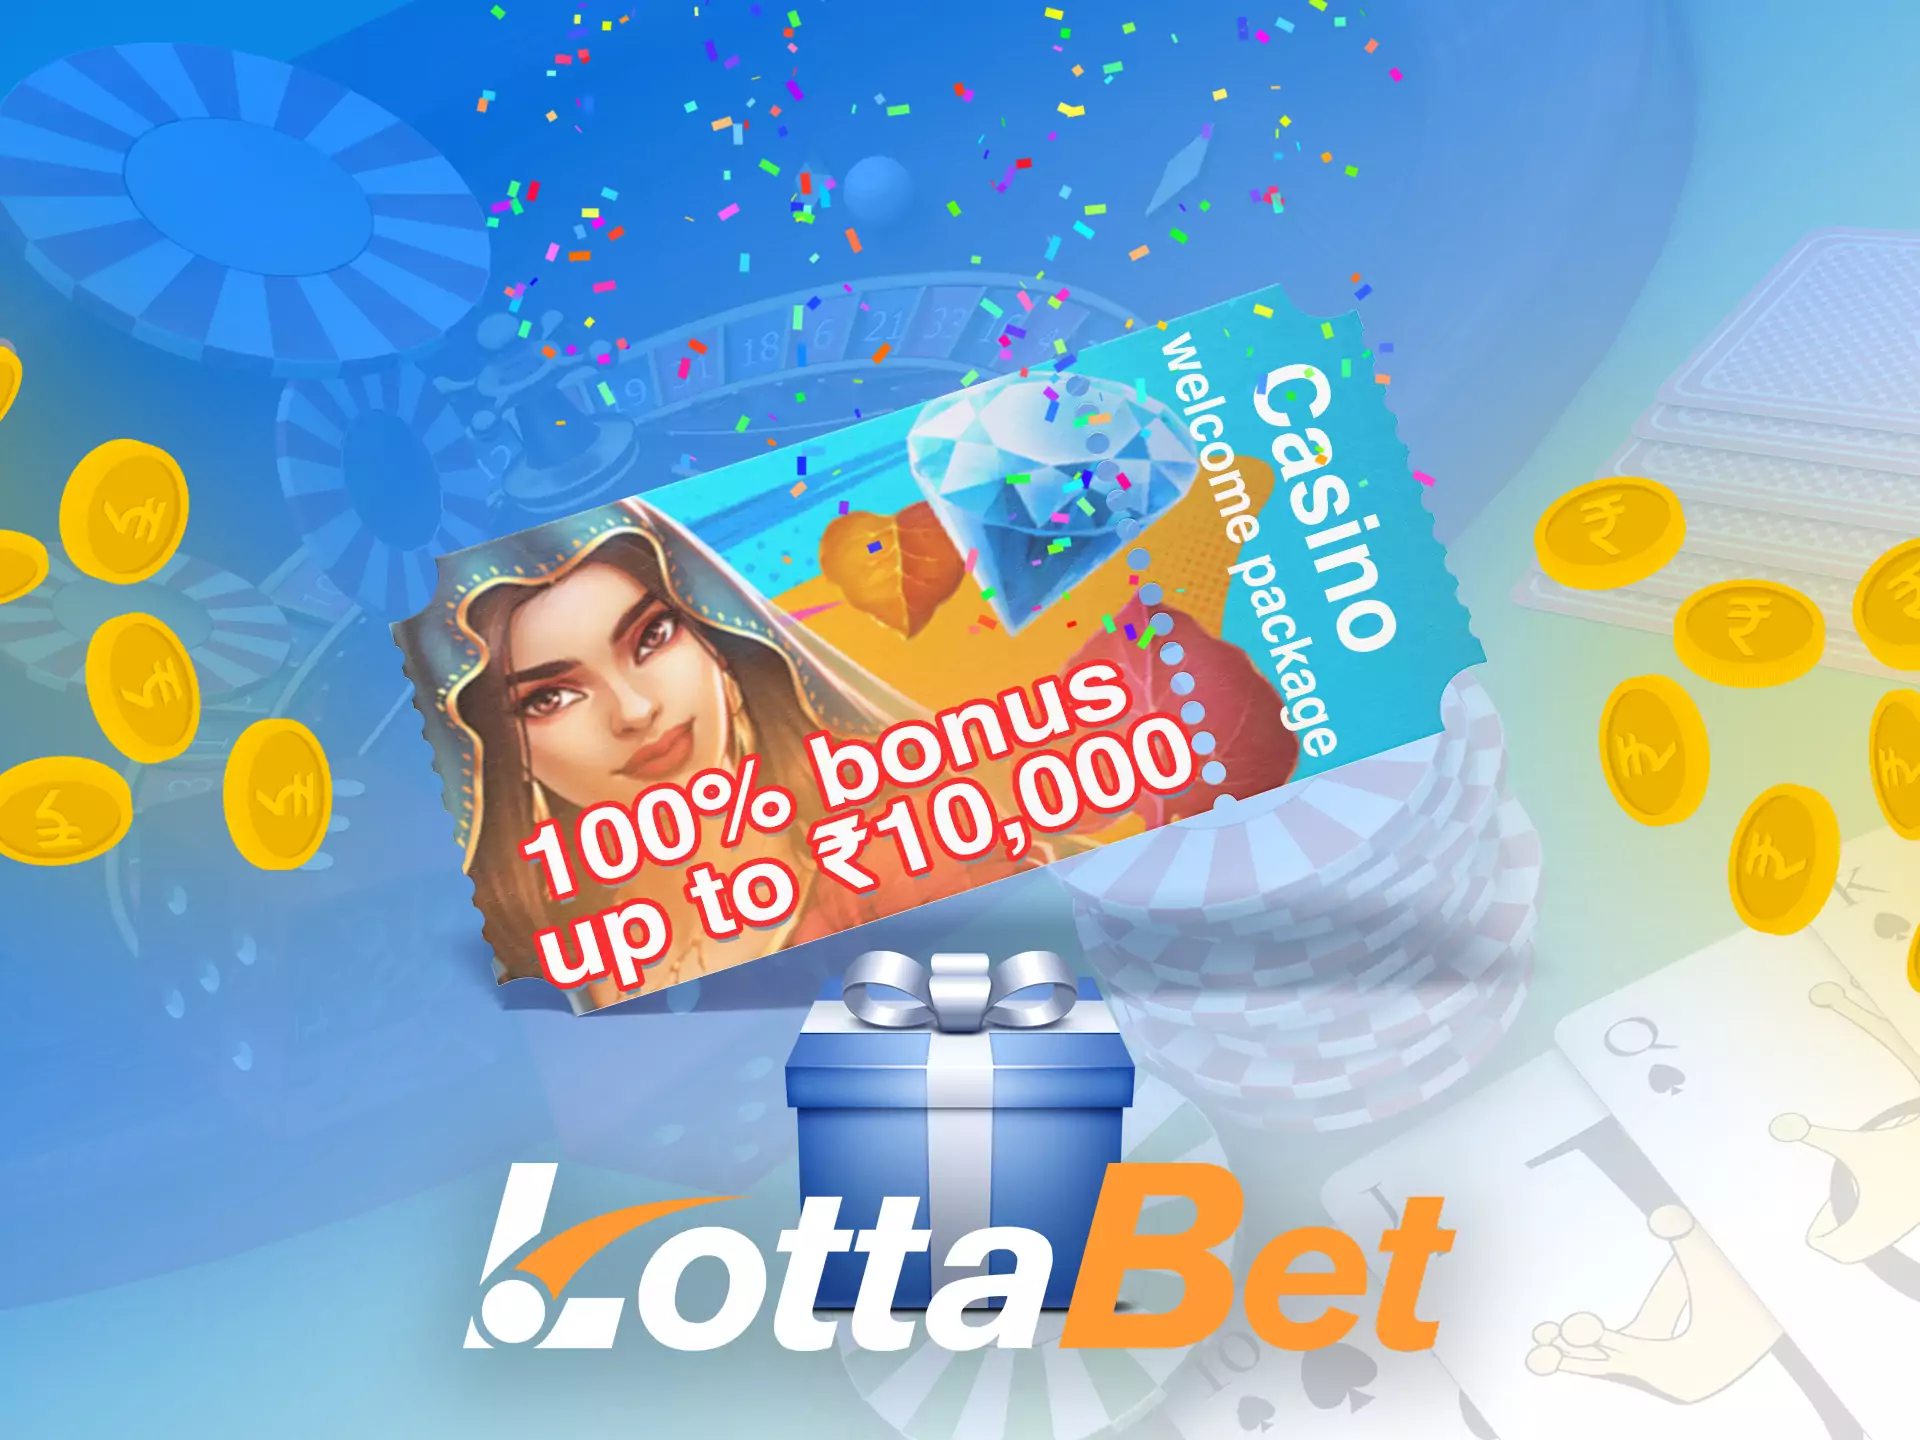 For players who enjoy casino games, there is a special bonus from Lottabet.